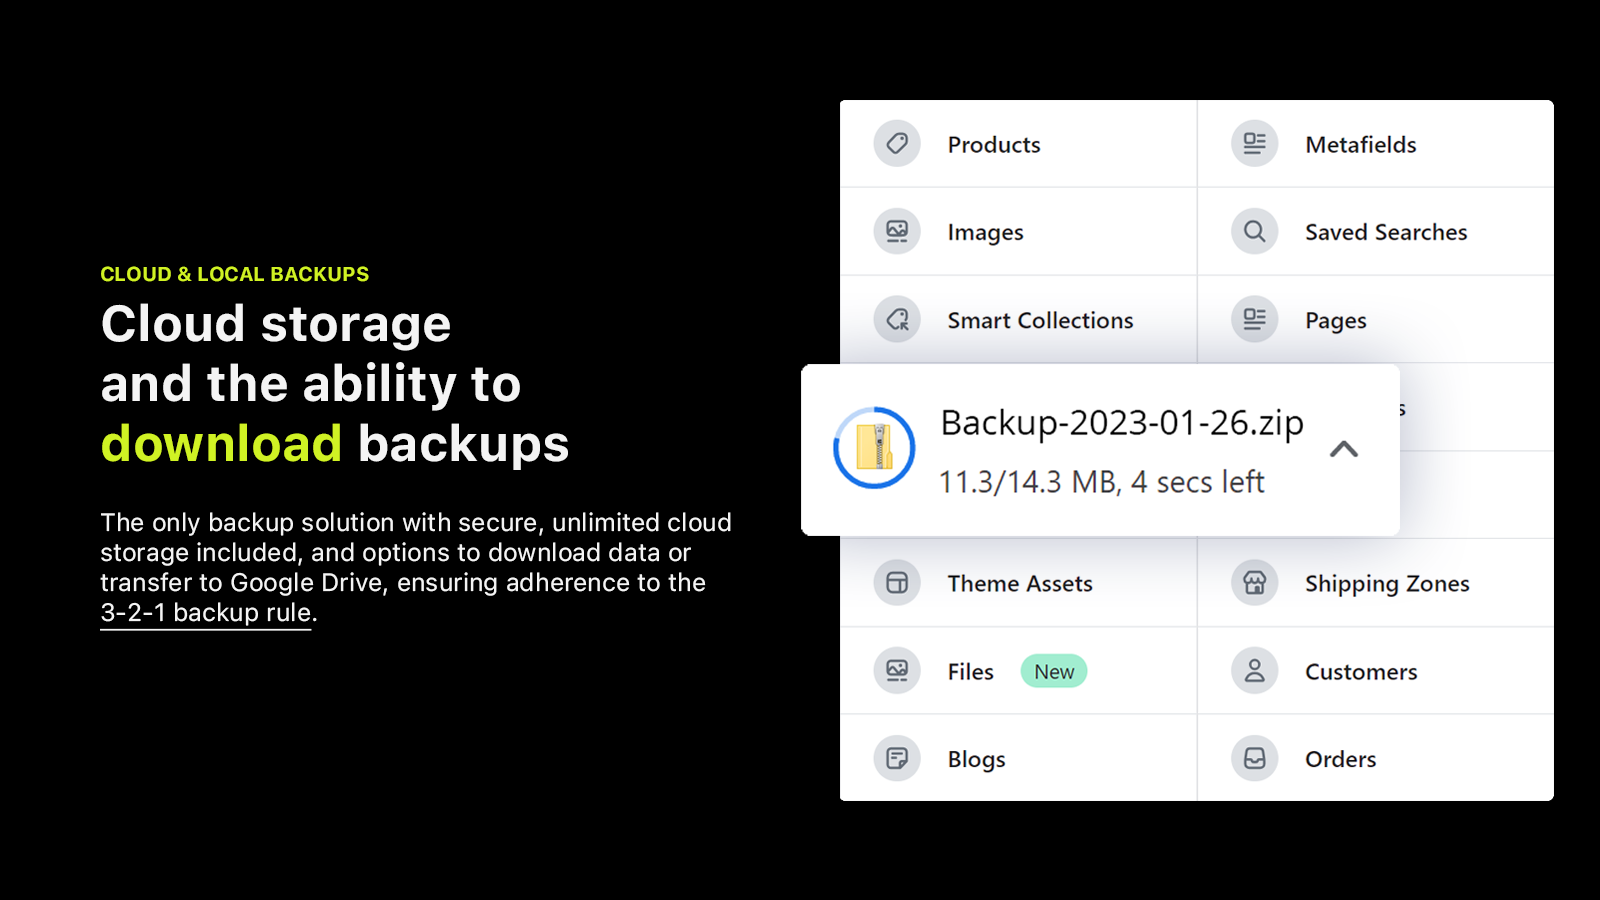 Cloud storage and the ability to download backups for Shopify